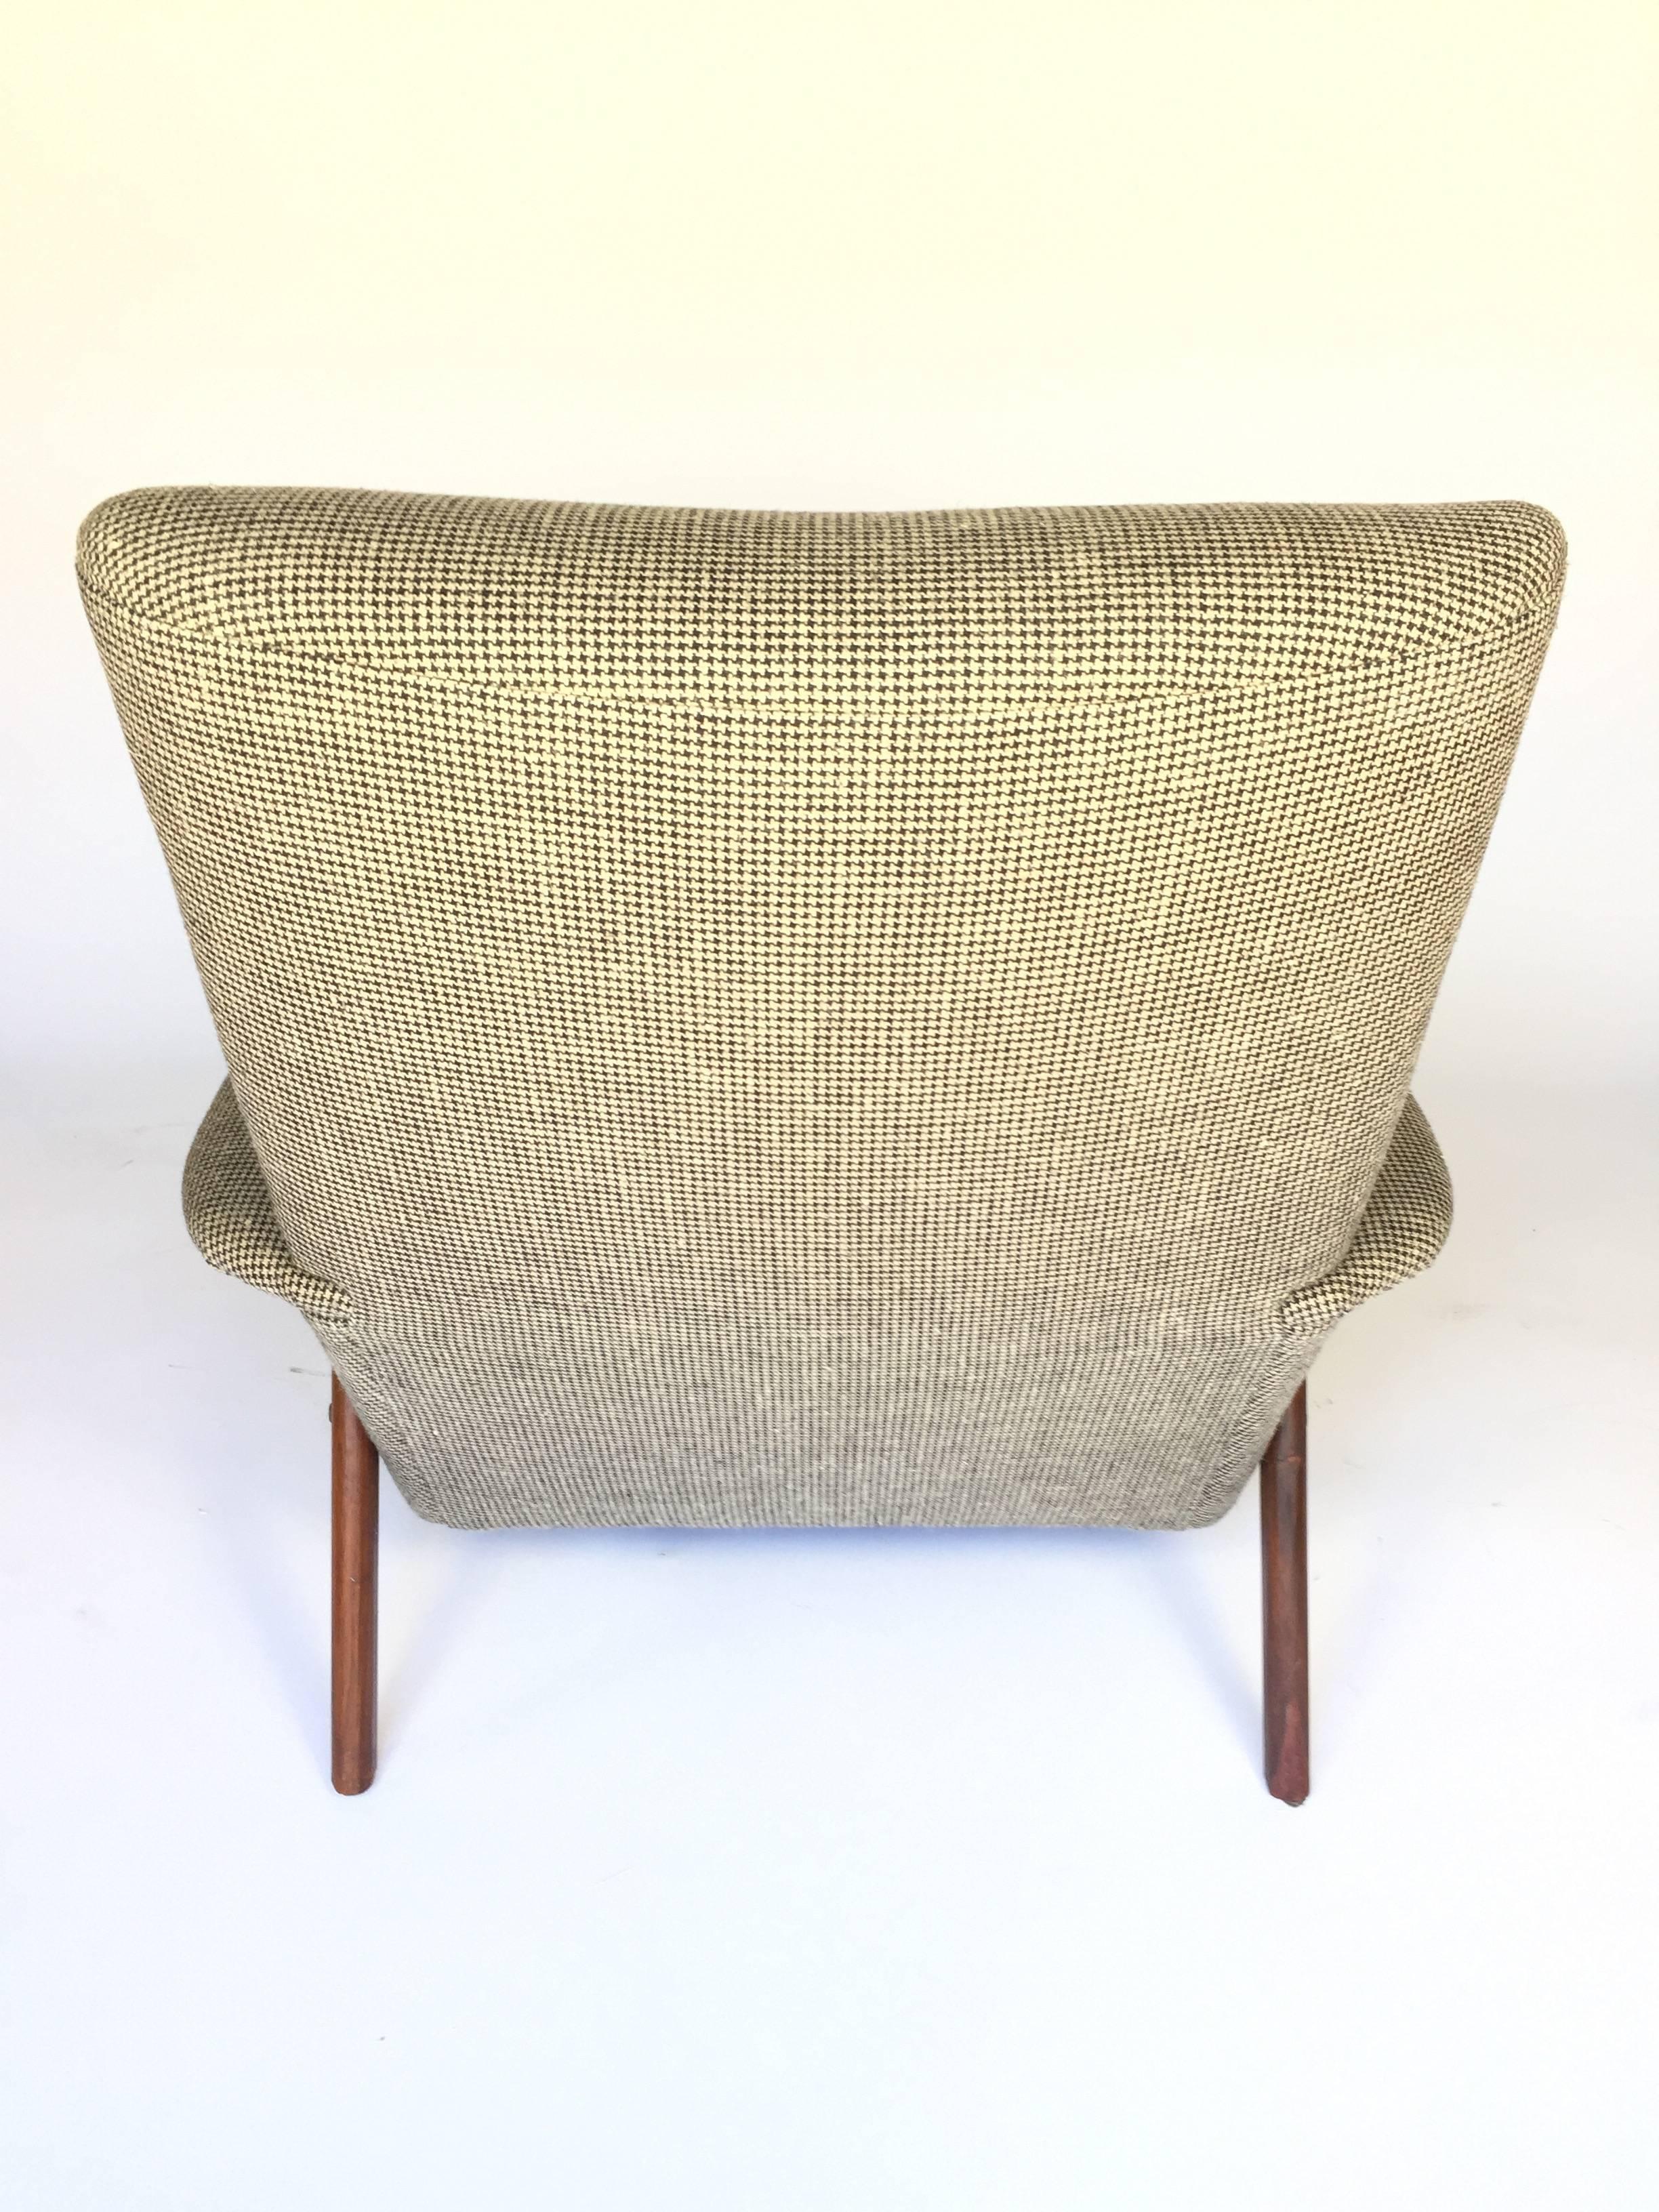 Mid-20th Century Folke Ohlsson for DUX Lounge Chair and Ottoman